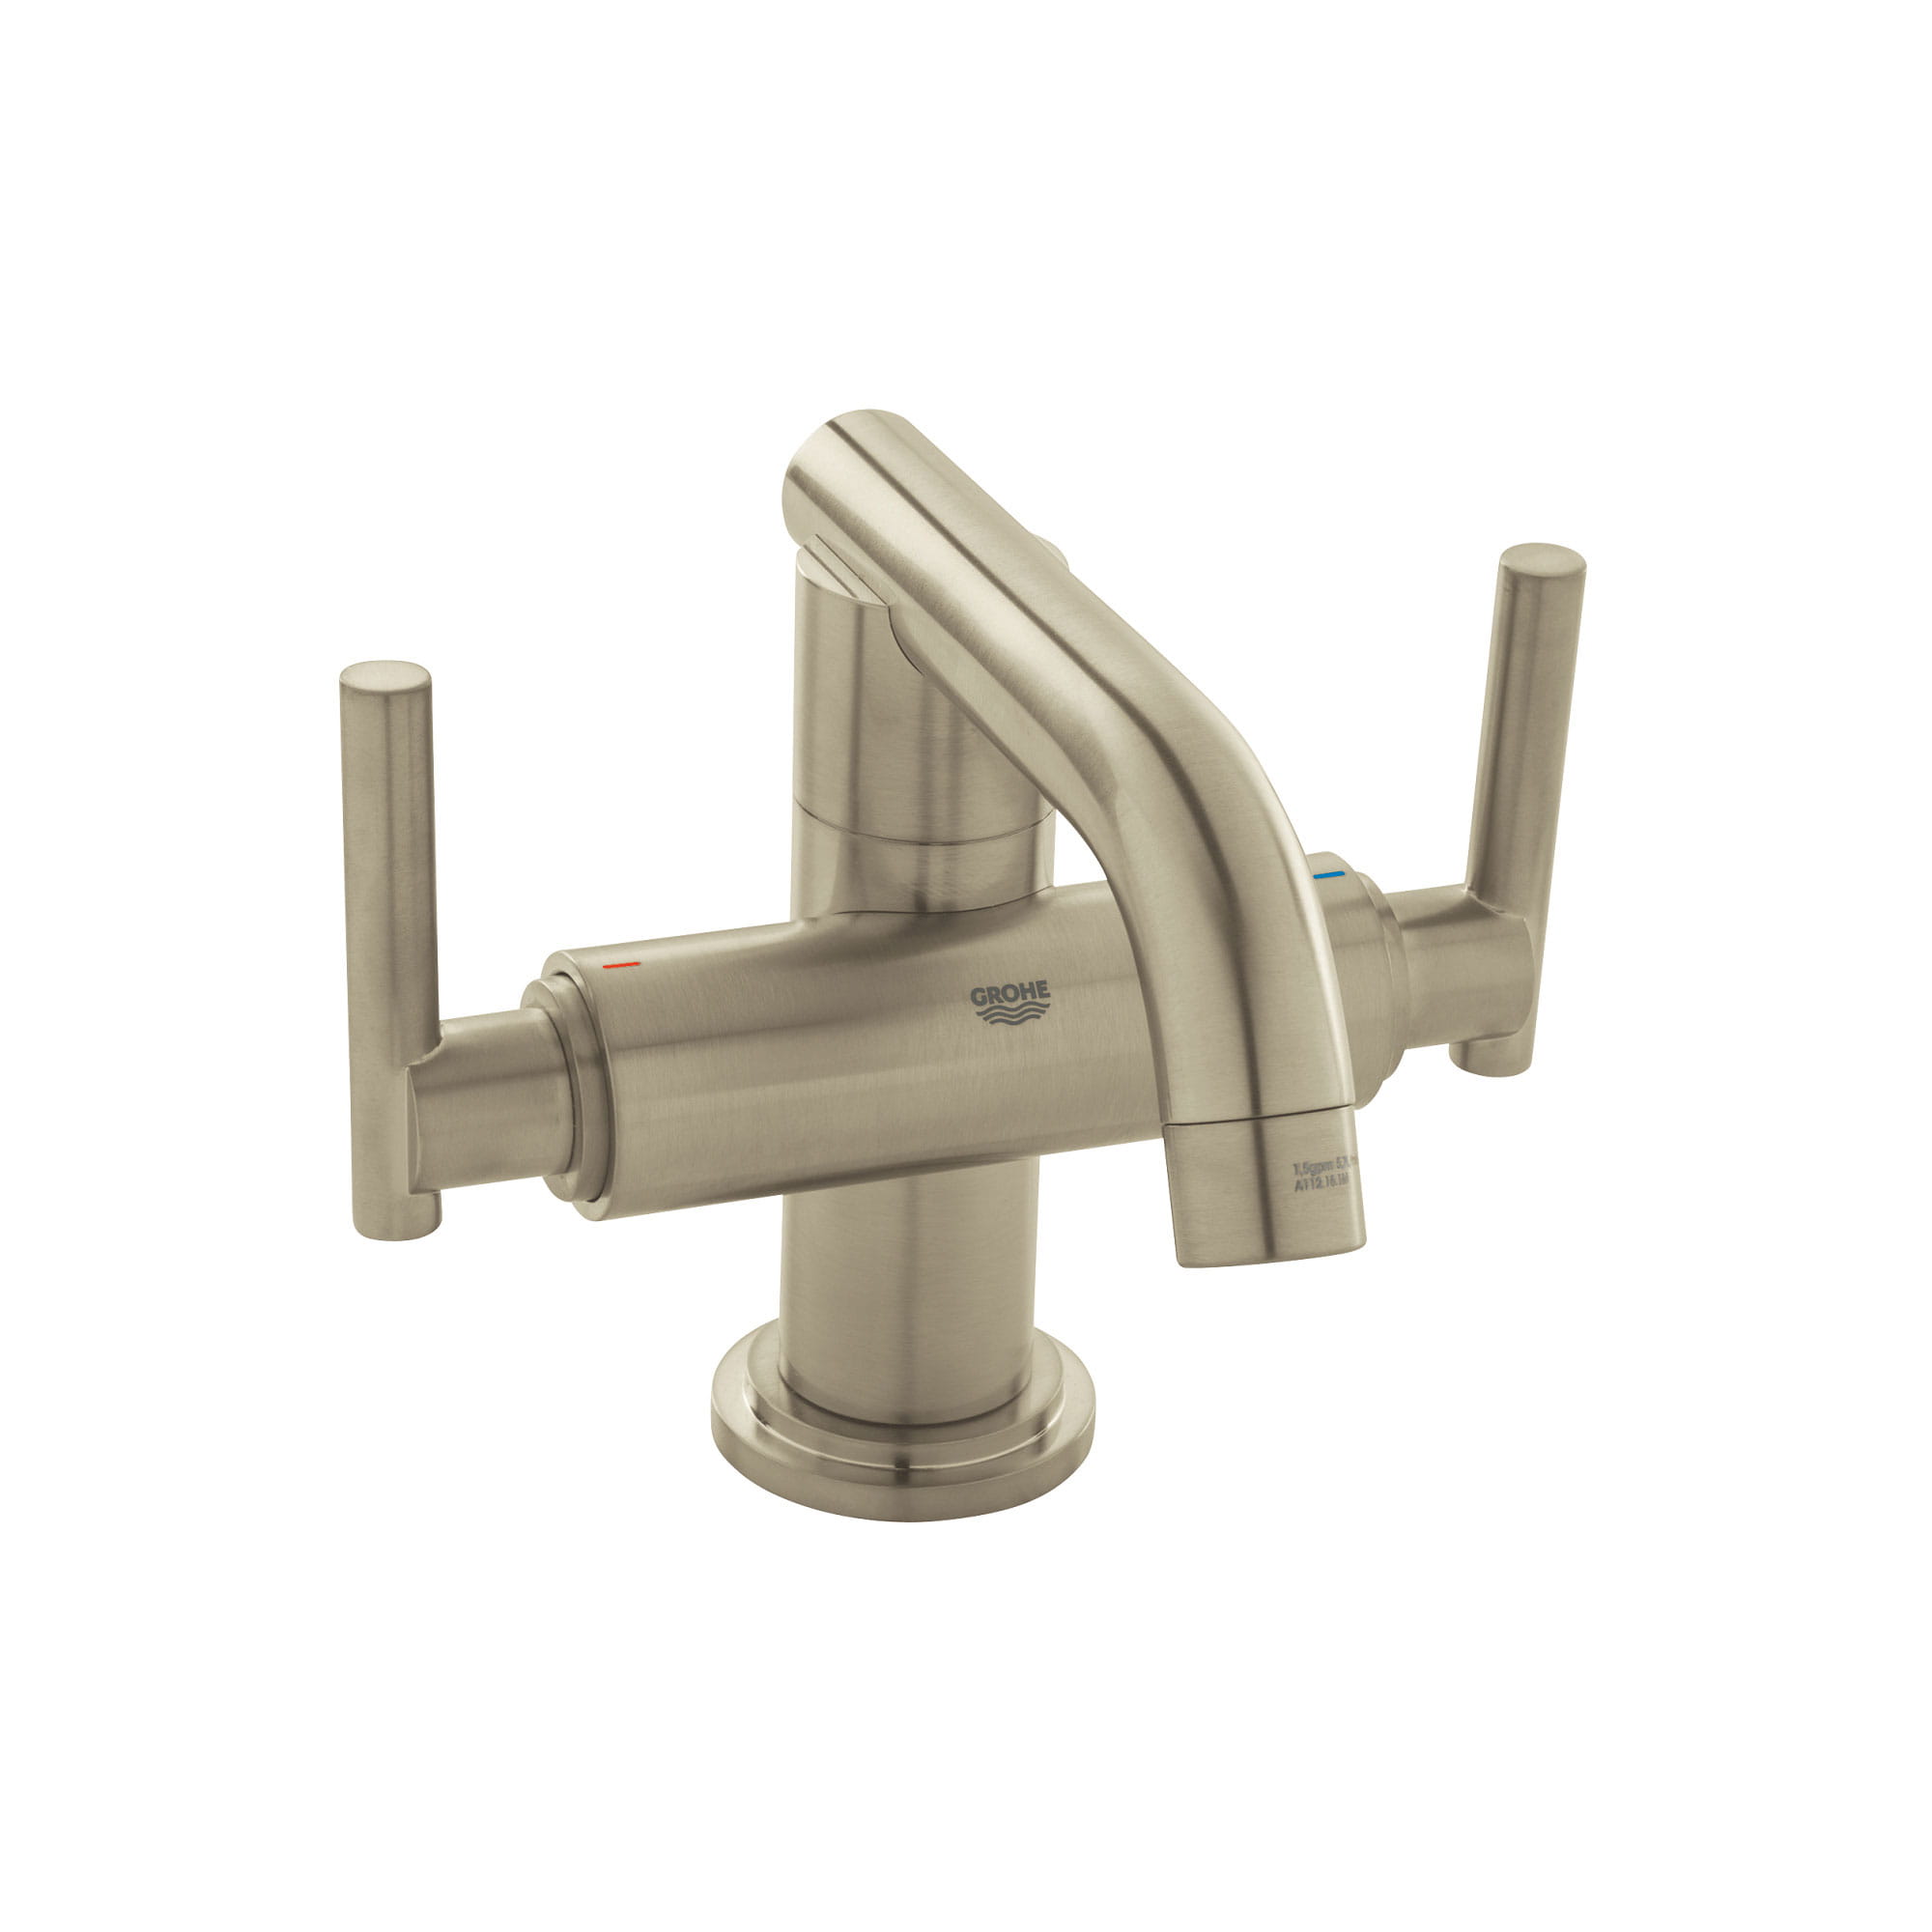 Single Hole 2 Handle M Size Bathroom Faucet 12 GPM GROHE BRUSHED NICKEL